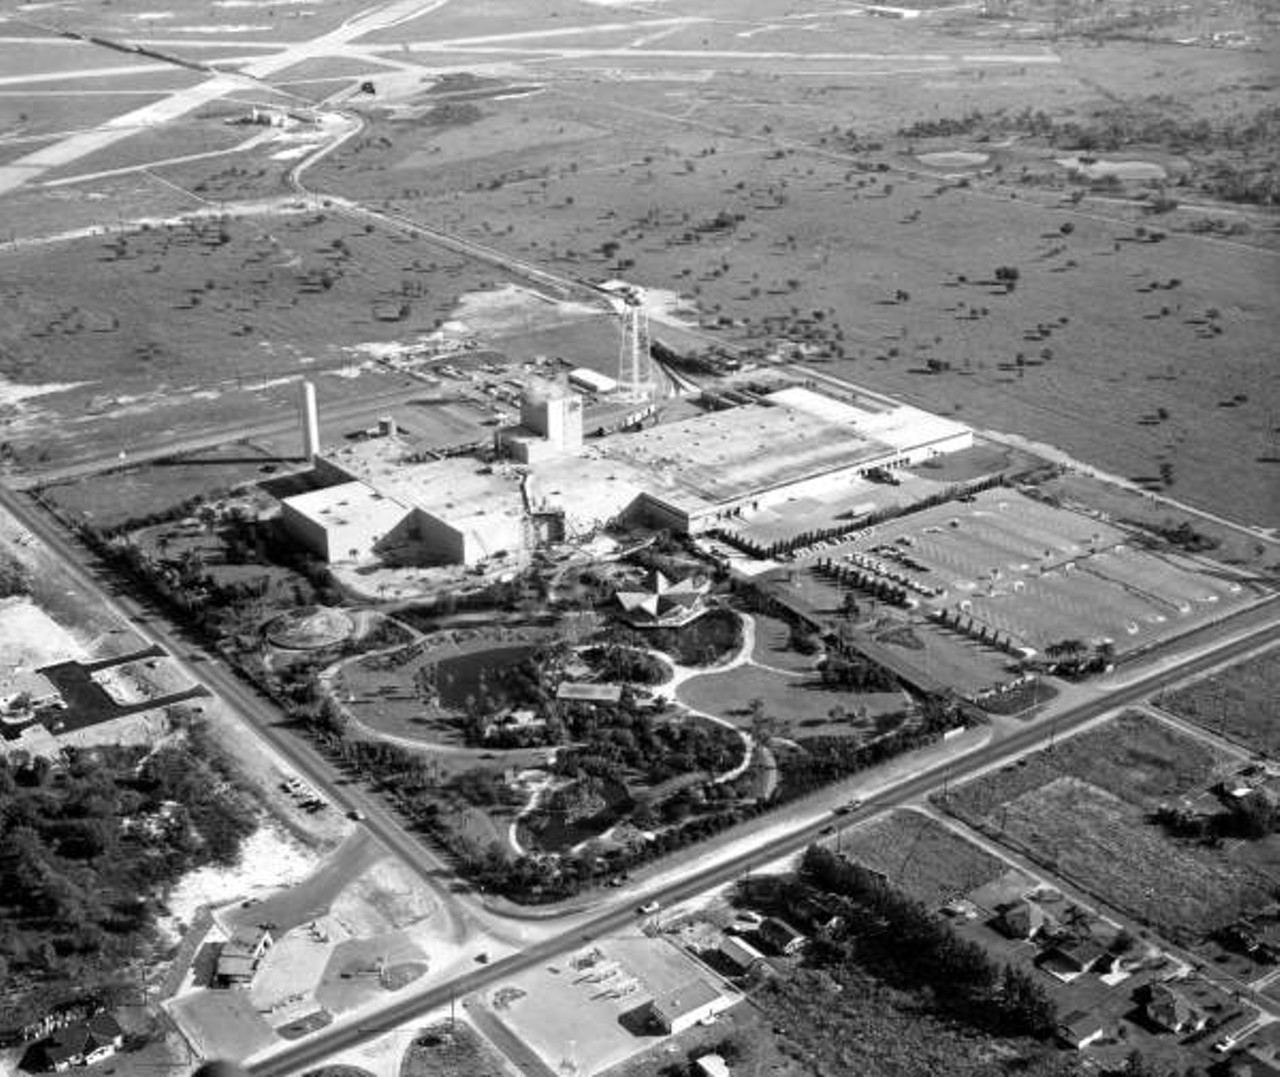 Aerial view overlooking the Busch Gardens amusement park and the Anheuser-Busch, inc. brewery in Tampa, Florida. 1960.